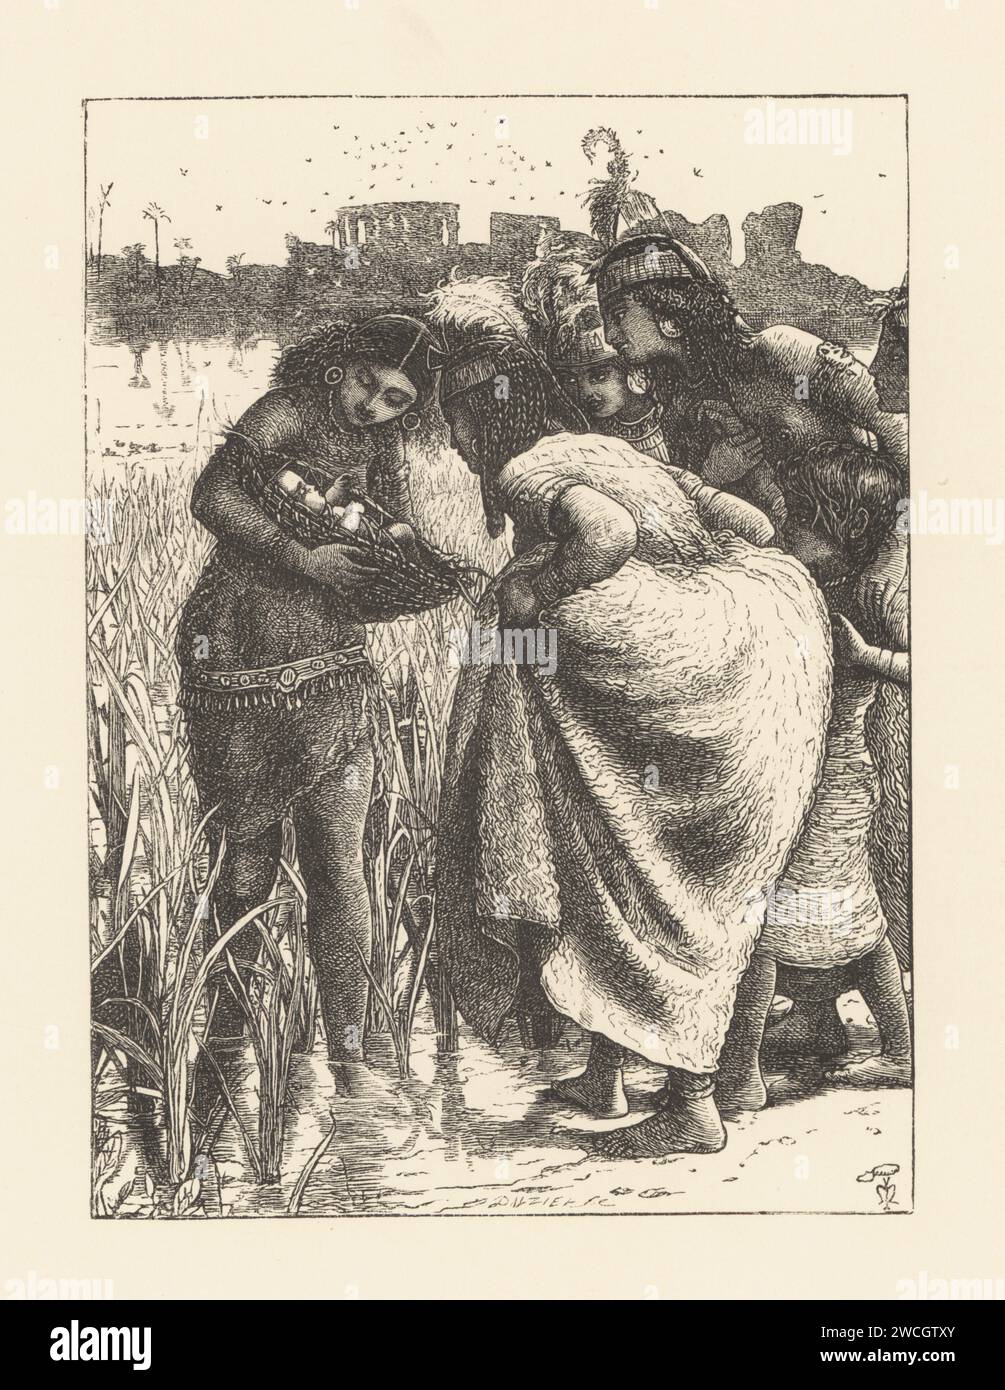 Egyptian women and children gather around baby Moses in a basket found in the bullrushes on the Nile. The Finding Of Moses. Book illustration originally published in Lays of the Holy Land. Woodcut by the Dalziel brothers after an illustration by Pre-Raphaelite artist John Everett Millais from Millais’ Illustrations, a Collection of Drawings on Wood, Alexander Strahan, London, 1866. Stock Photo